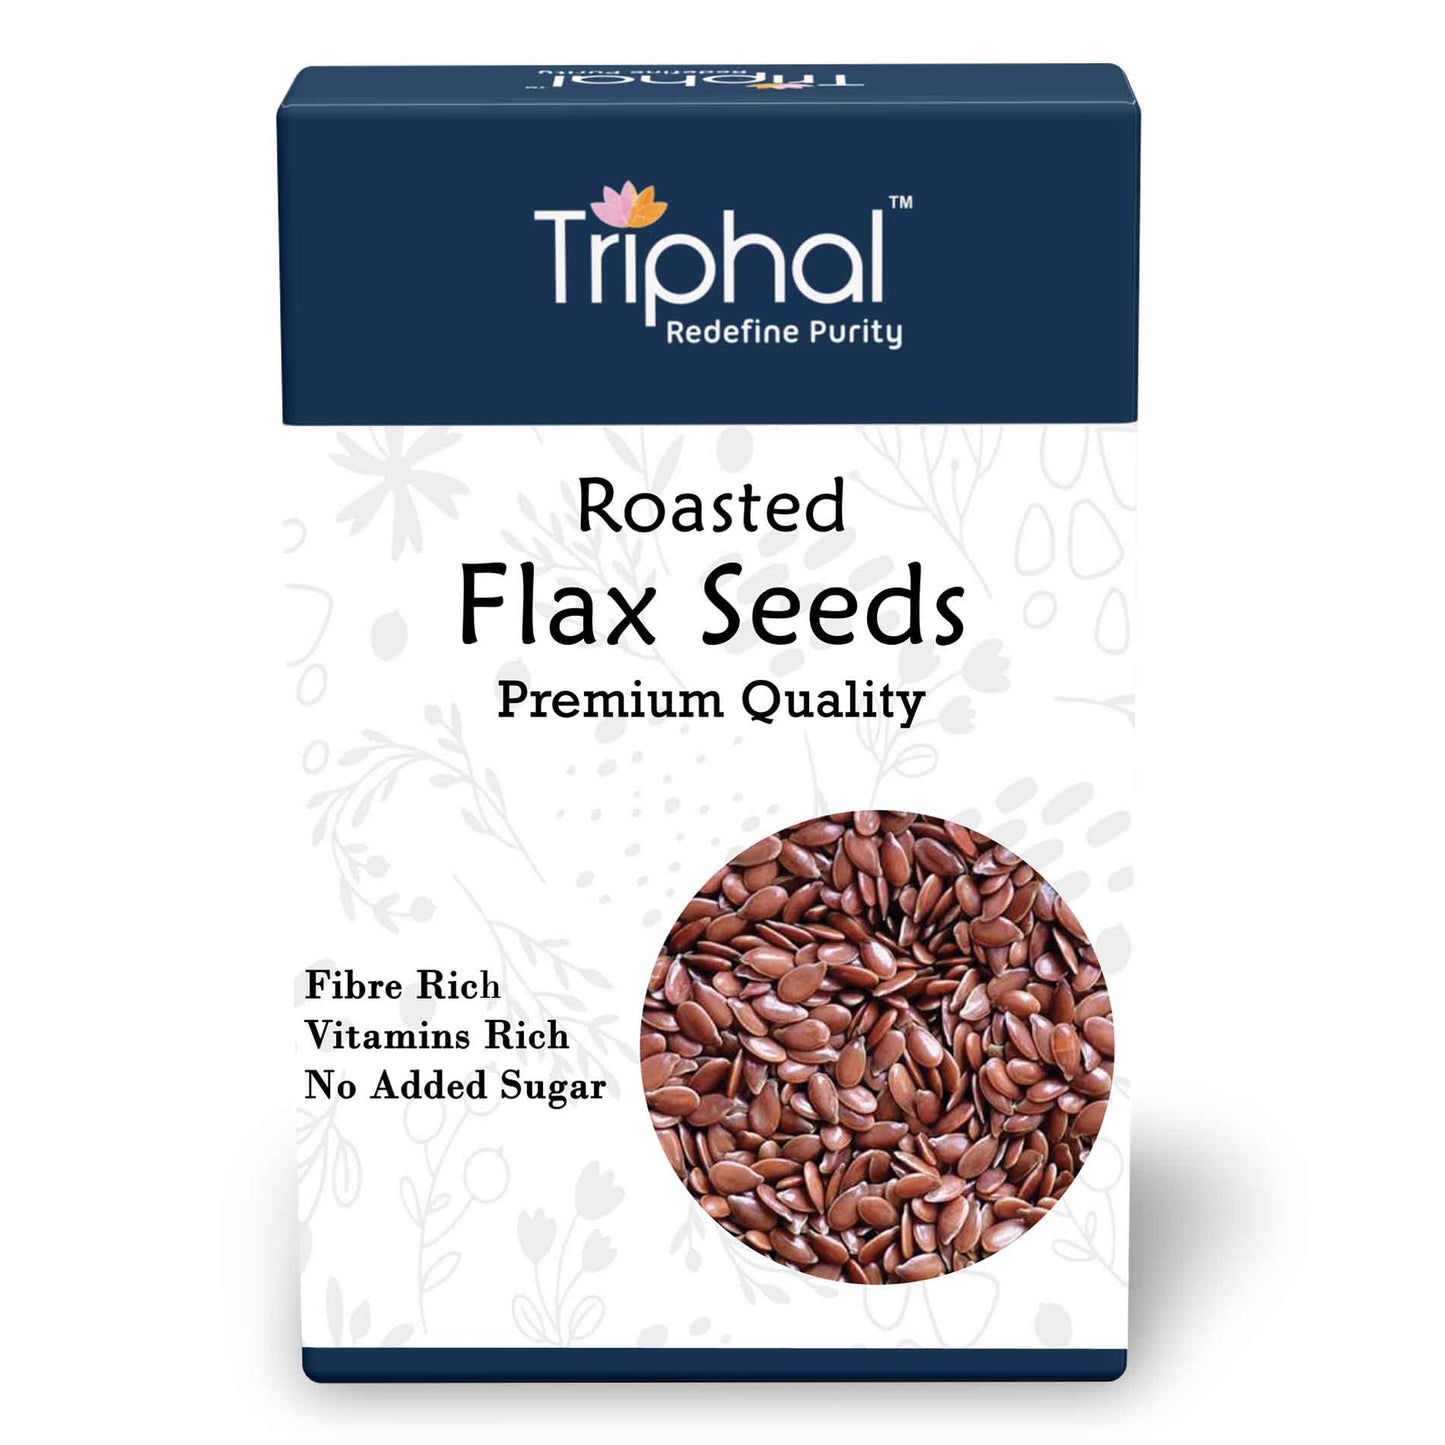 Triphal's Crunchy Roasted Flax Seeds - A Delicious and Nutritious Superfood Snack